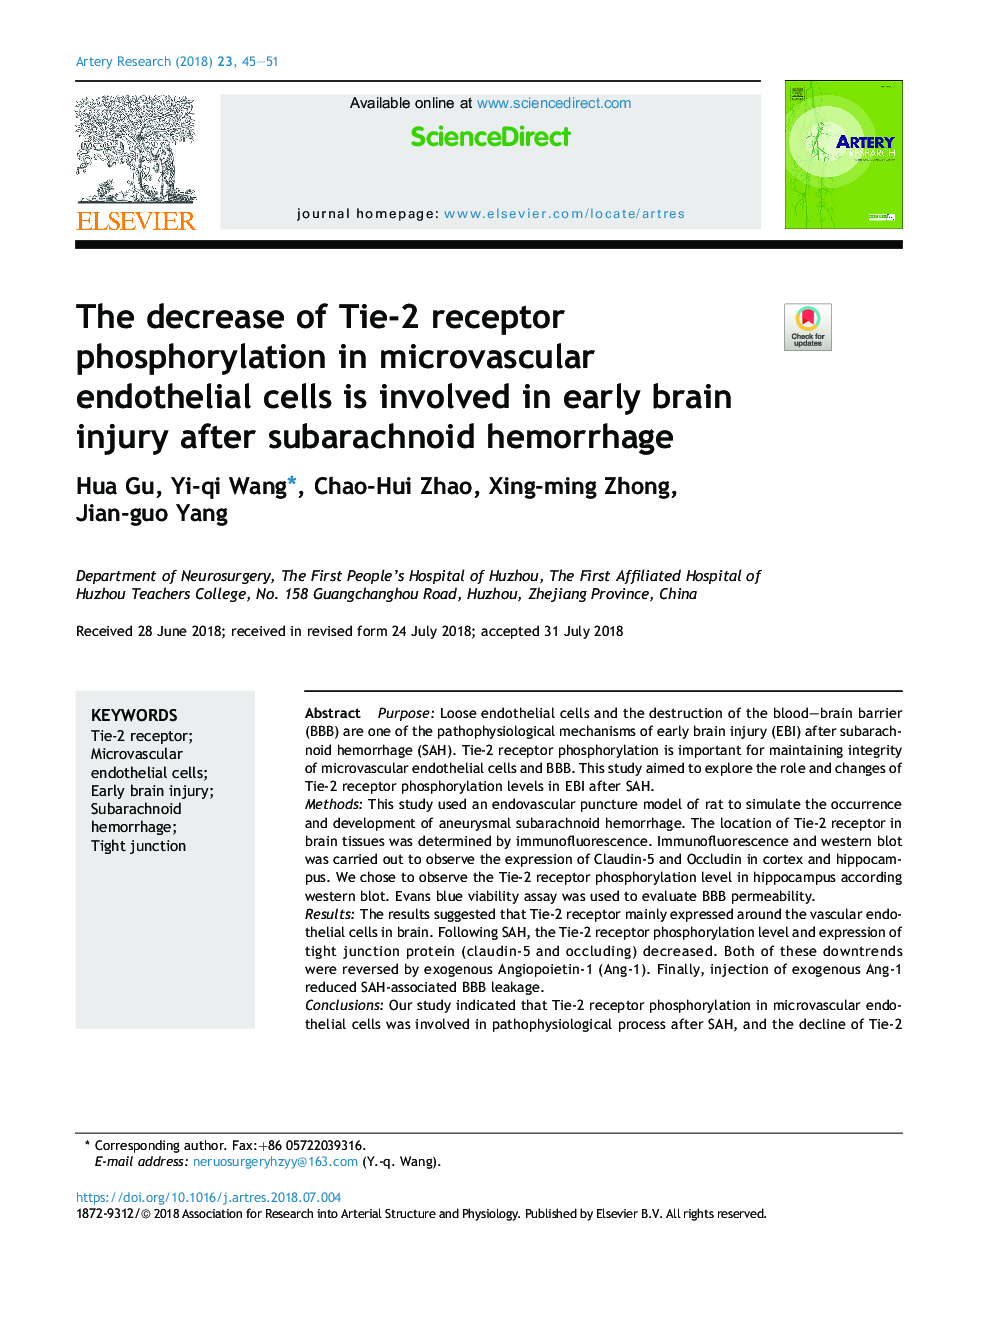 The decrease of Tie-2 receptor phosphorylation in microvascular endothelial cells is involved in early brain injury after subarachnoid hemorrhage